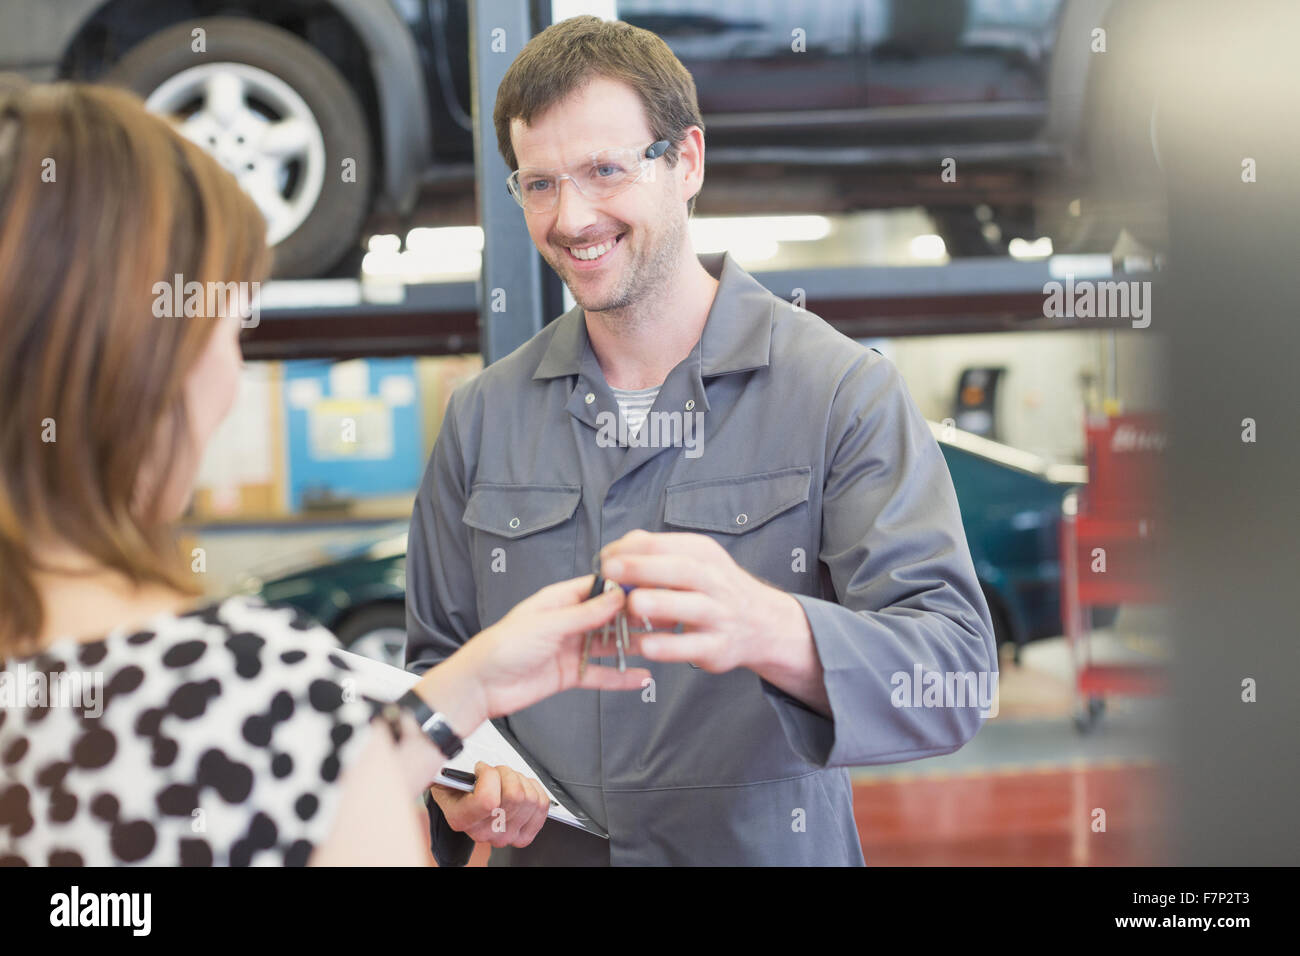 Mechanic taking keys from woman in auto repair shop Stock Photo